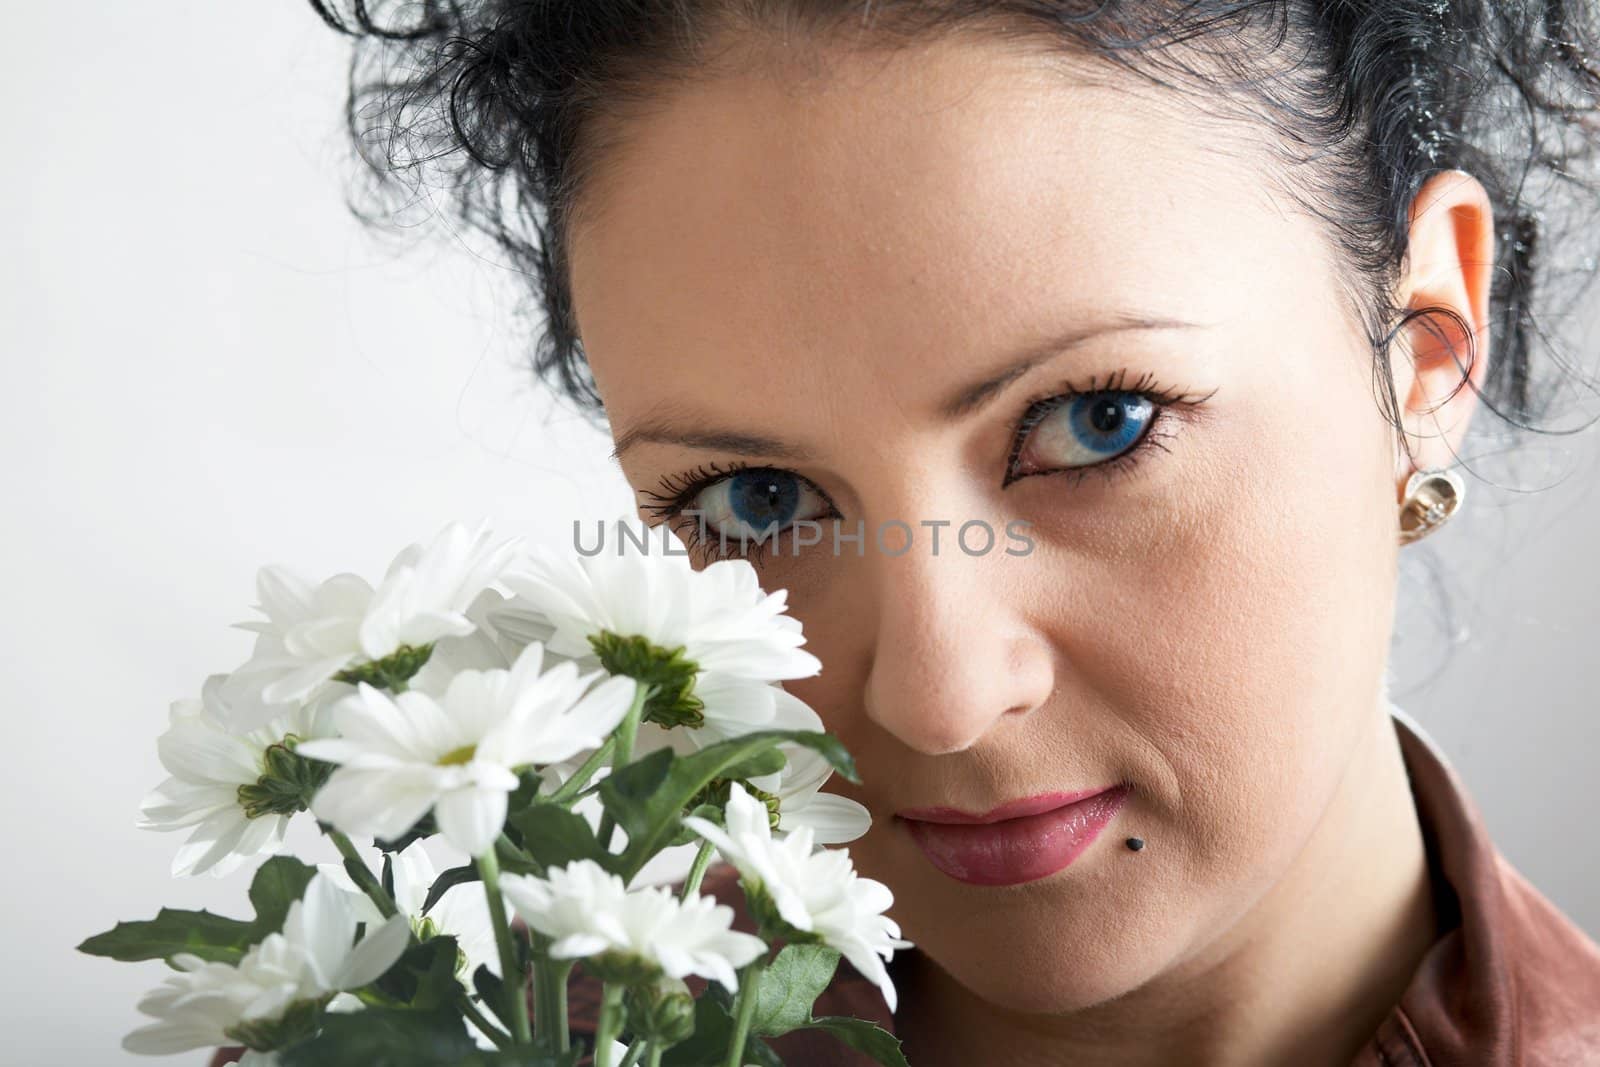 An image of nice woman with white flowers